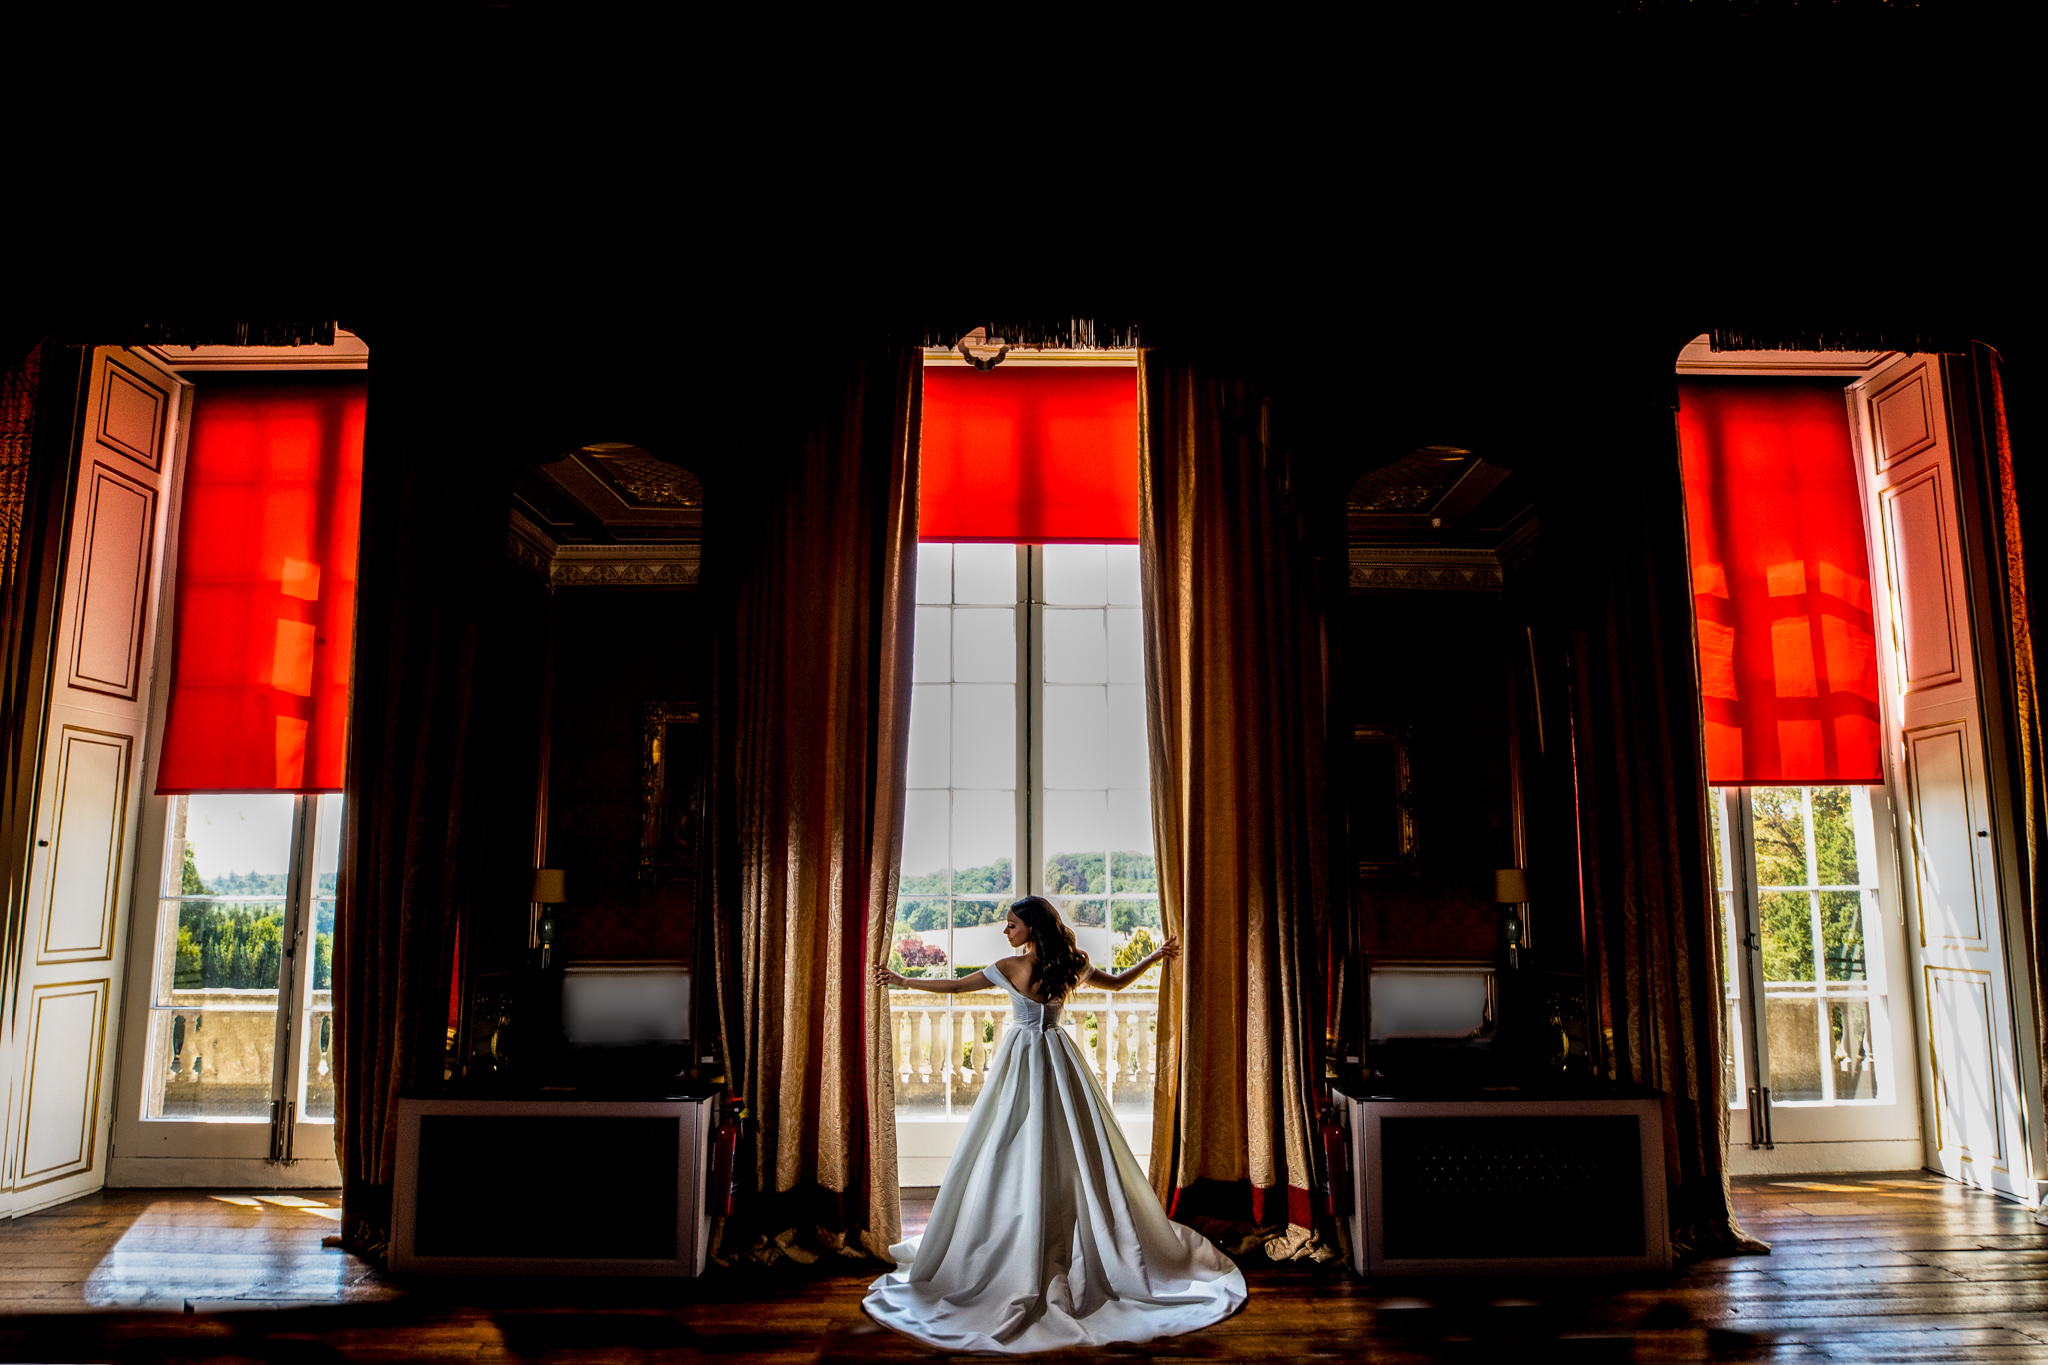 A bride holding curtains in a large stately home reception room. The curtains a red and the sun is shining in from the windows